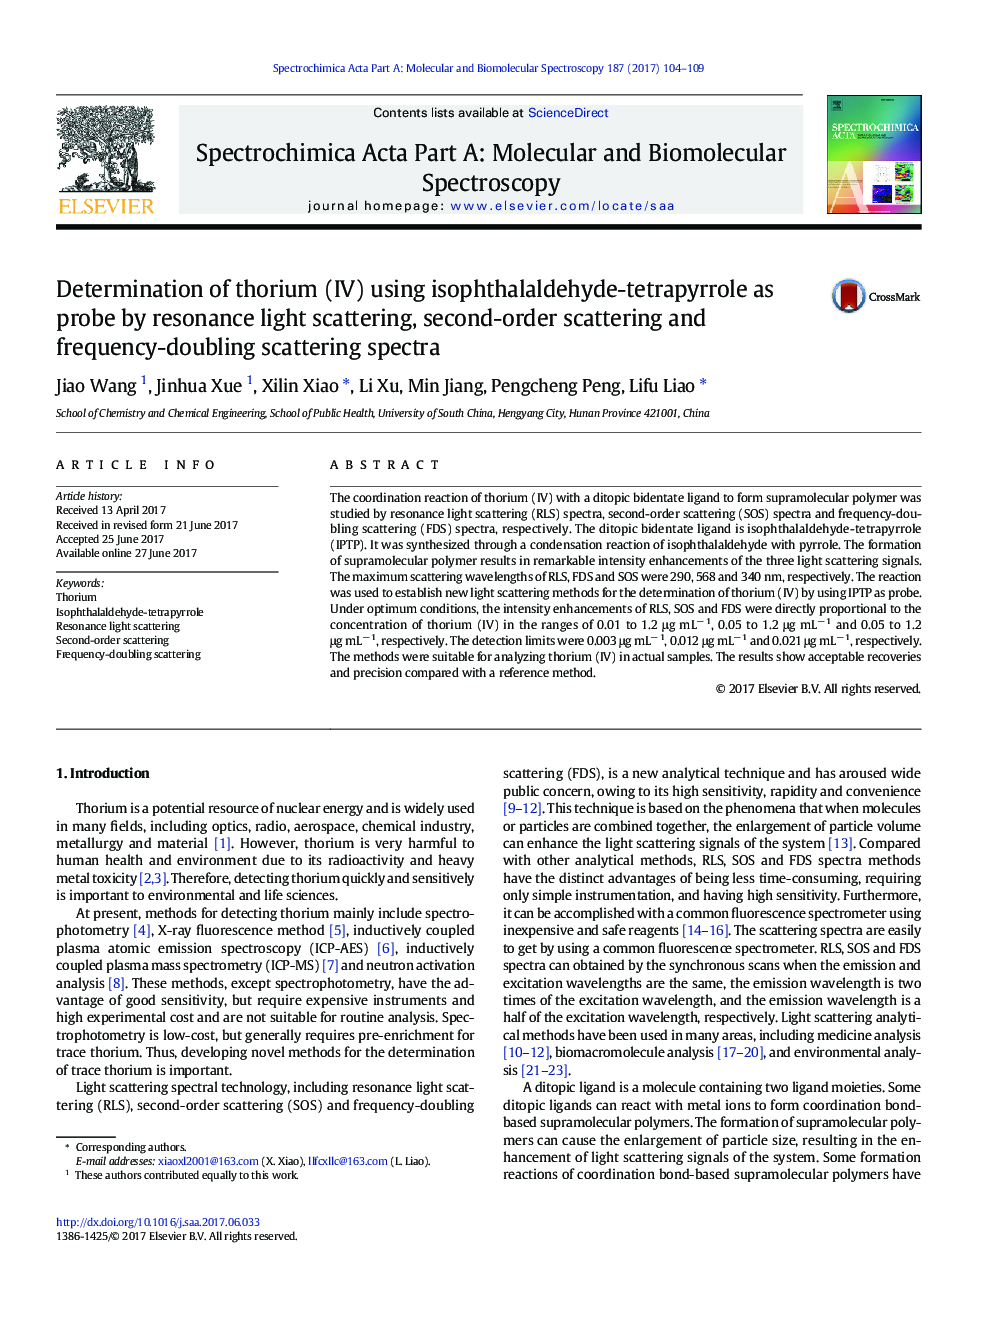 Determination of thorium (IV) using isophthalaldehyde-tetrapyrrole as probe by resonance light scattering, second-order scattering and frequency-doubling scattering spectra